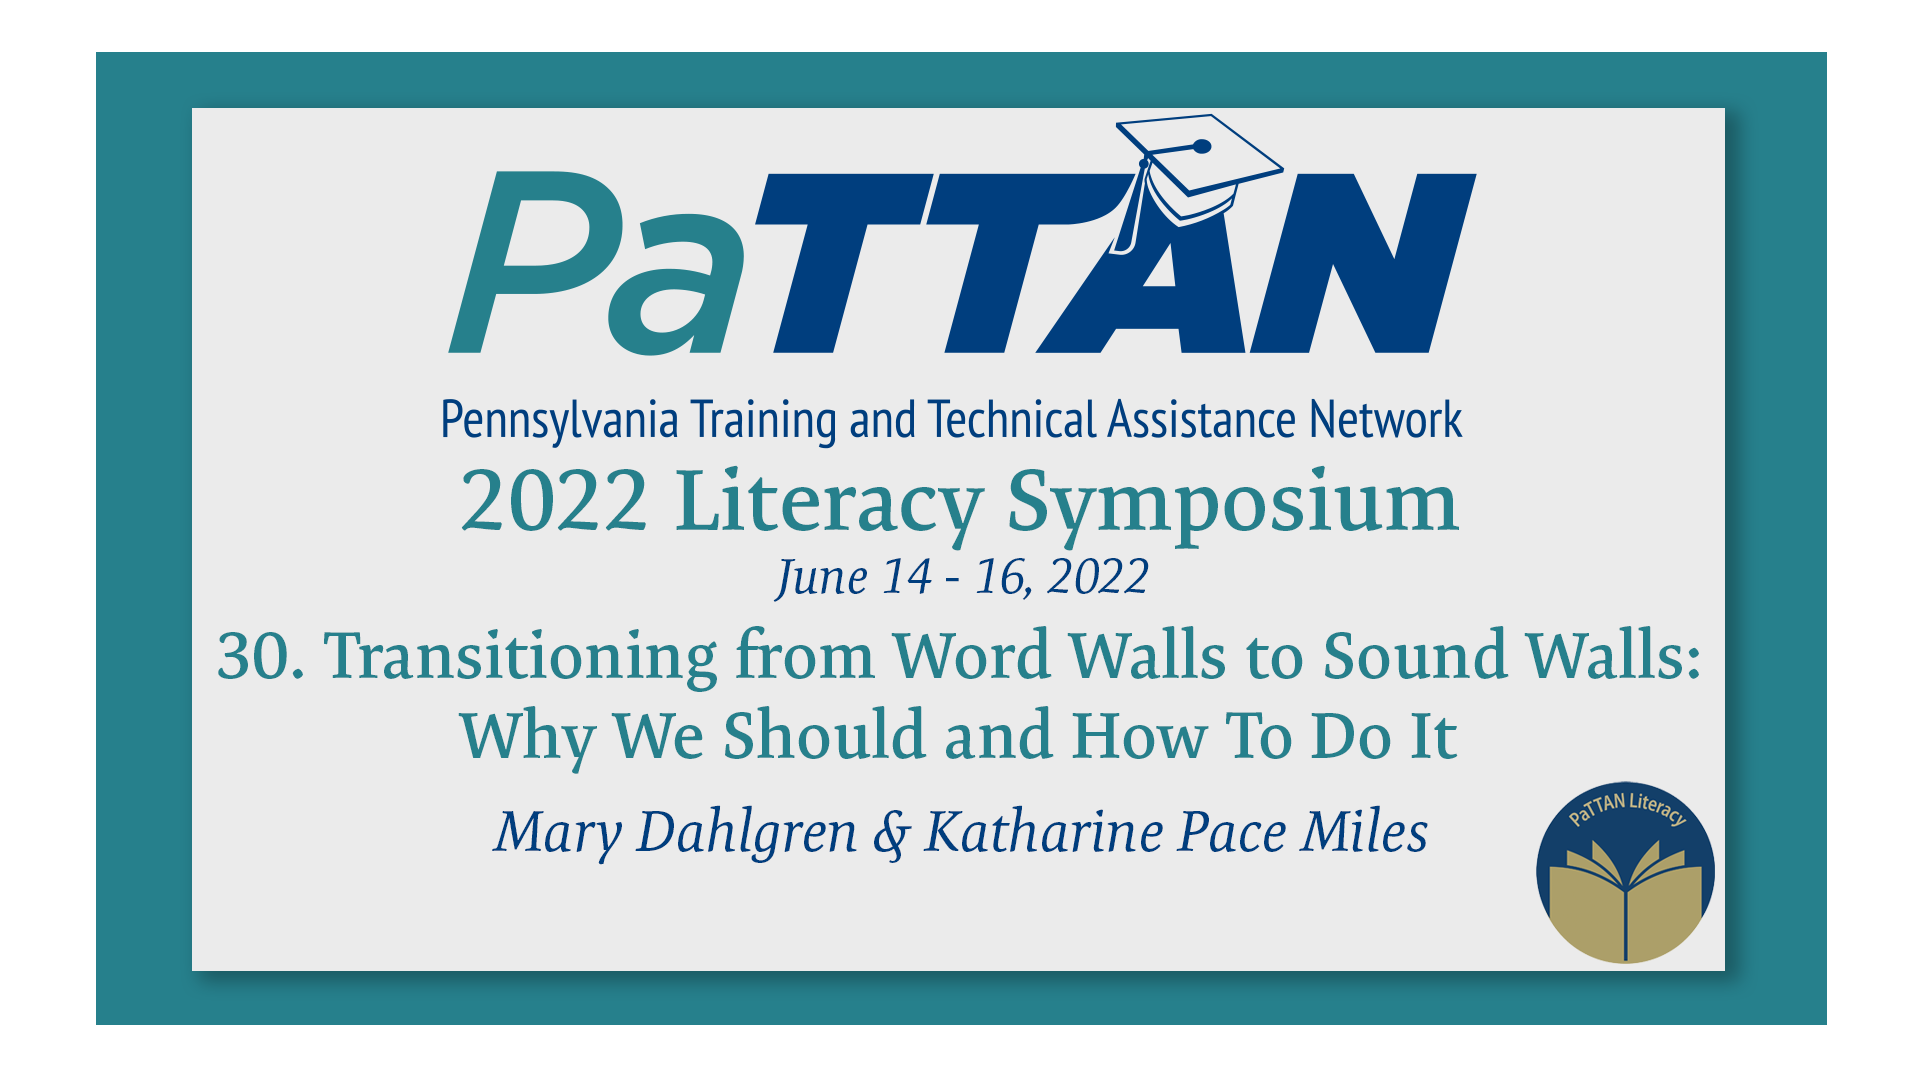 30. Transitioning from Word Walls to Sound Walls | 2022 Literacy Symposium